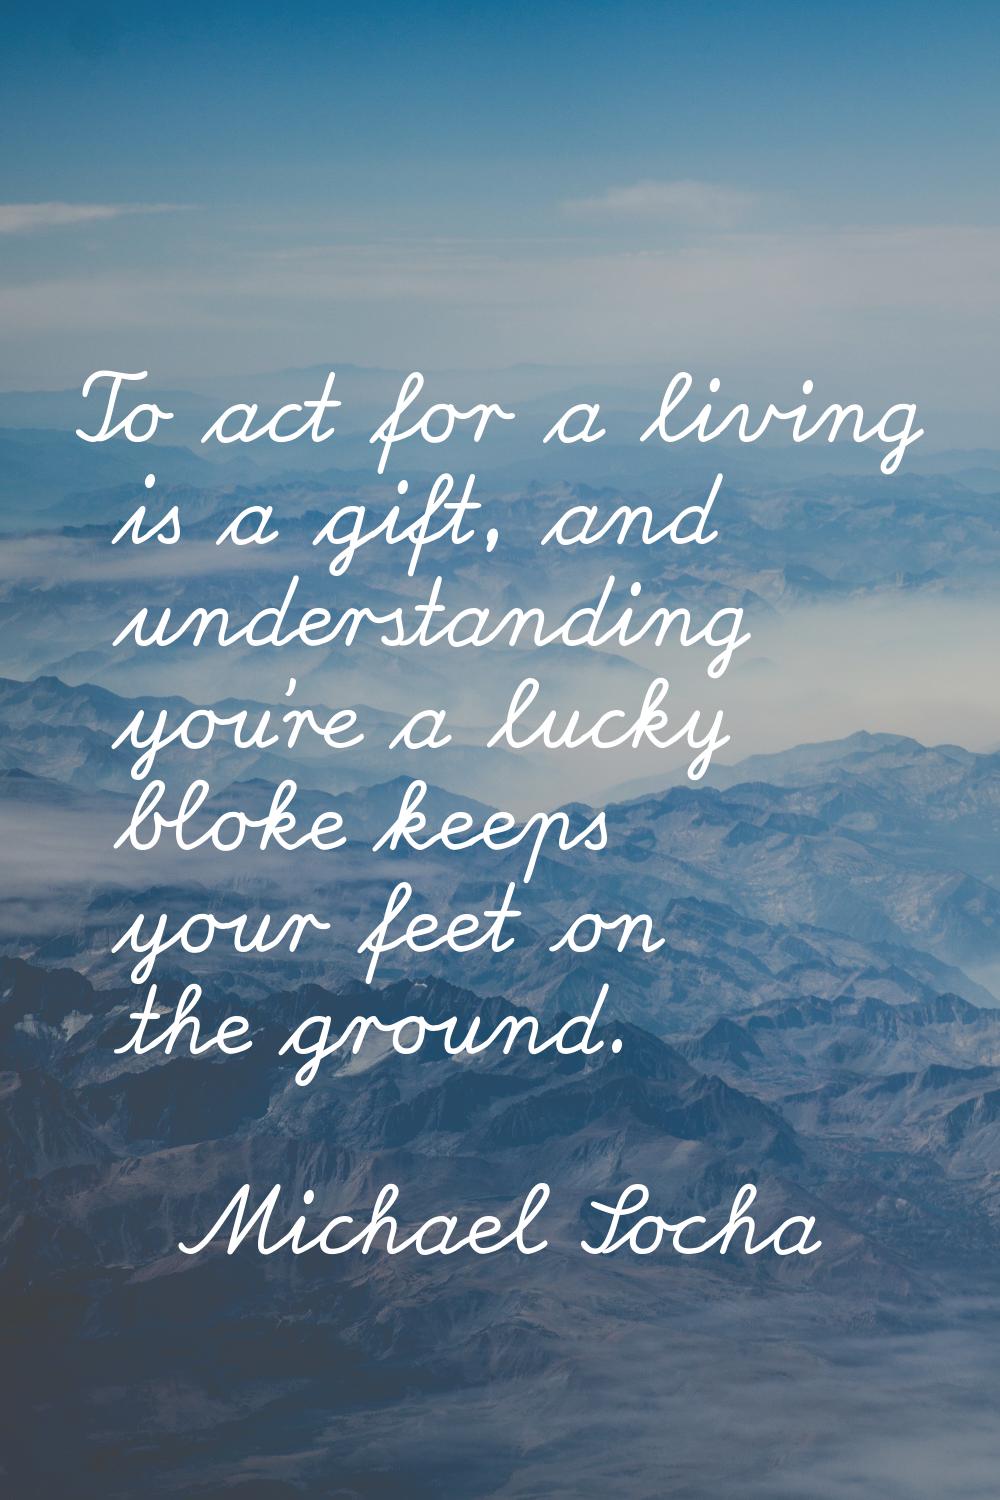 To act for a living is a gift, and understanding you're a lucky bloke keeps your feet on the ground